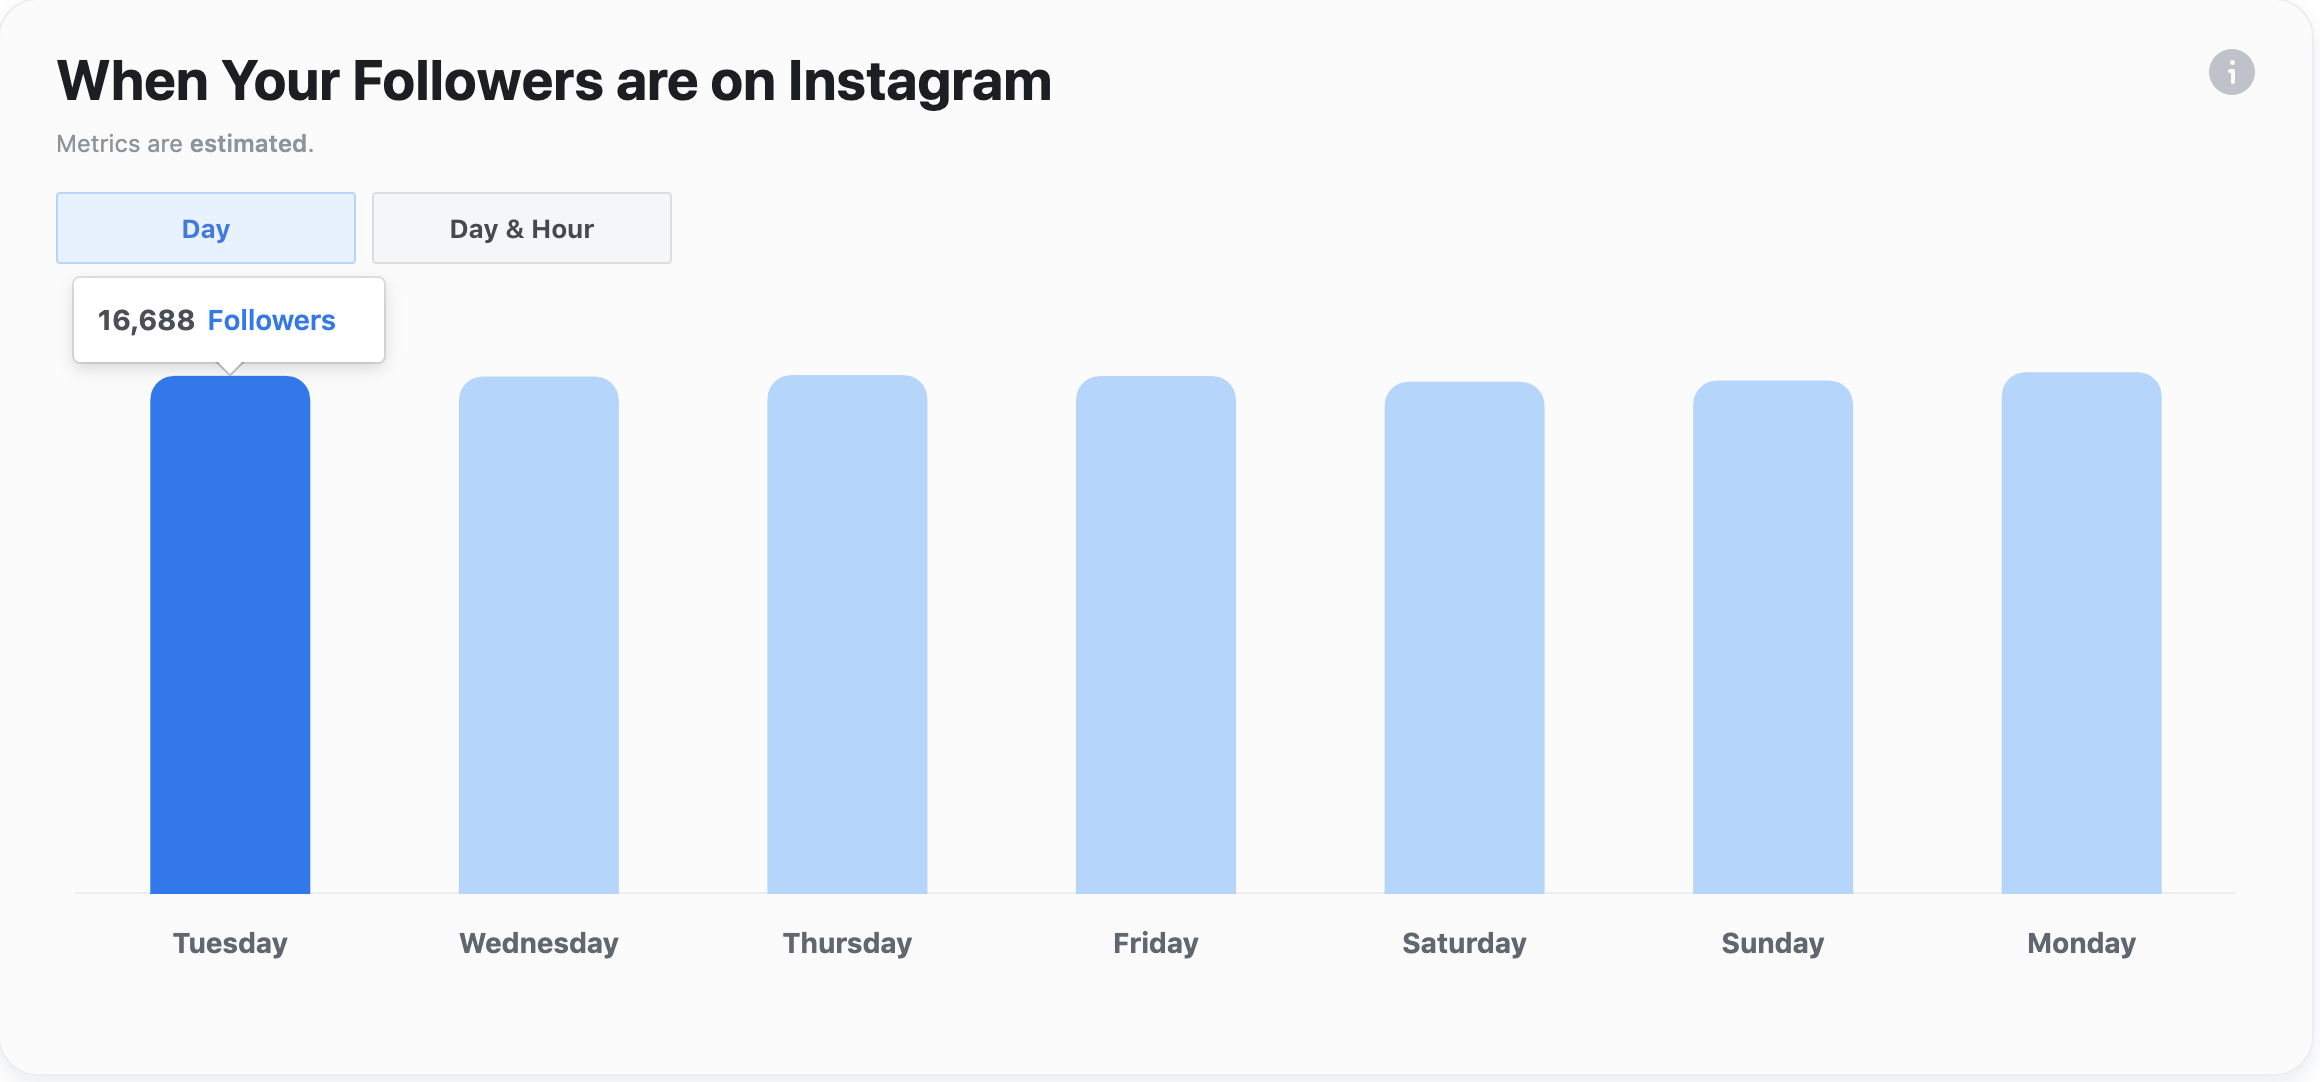 when your followers are on instagram (days of week)